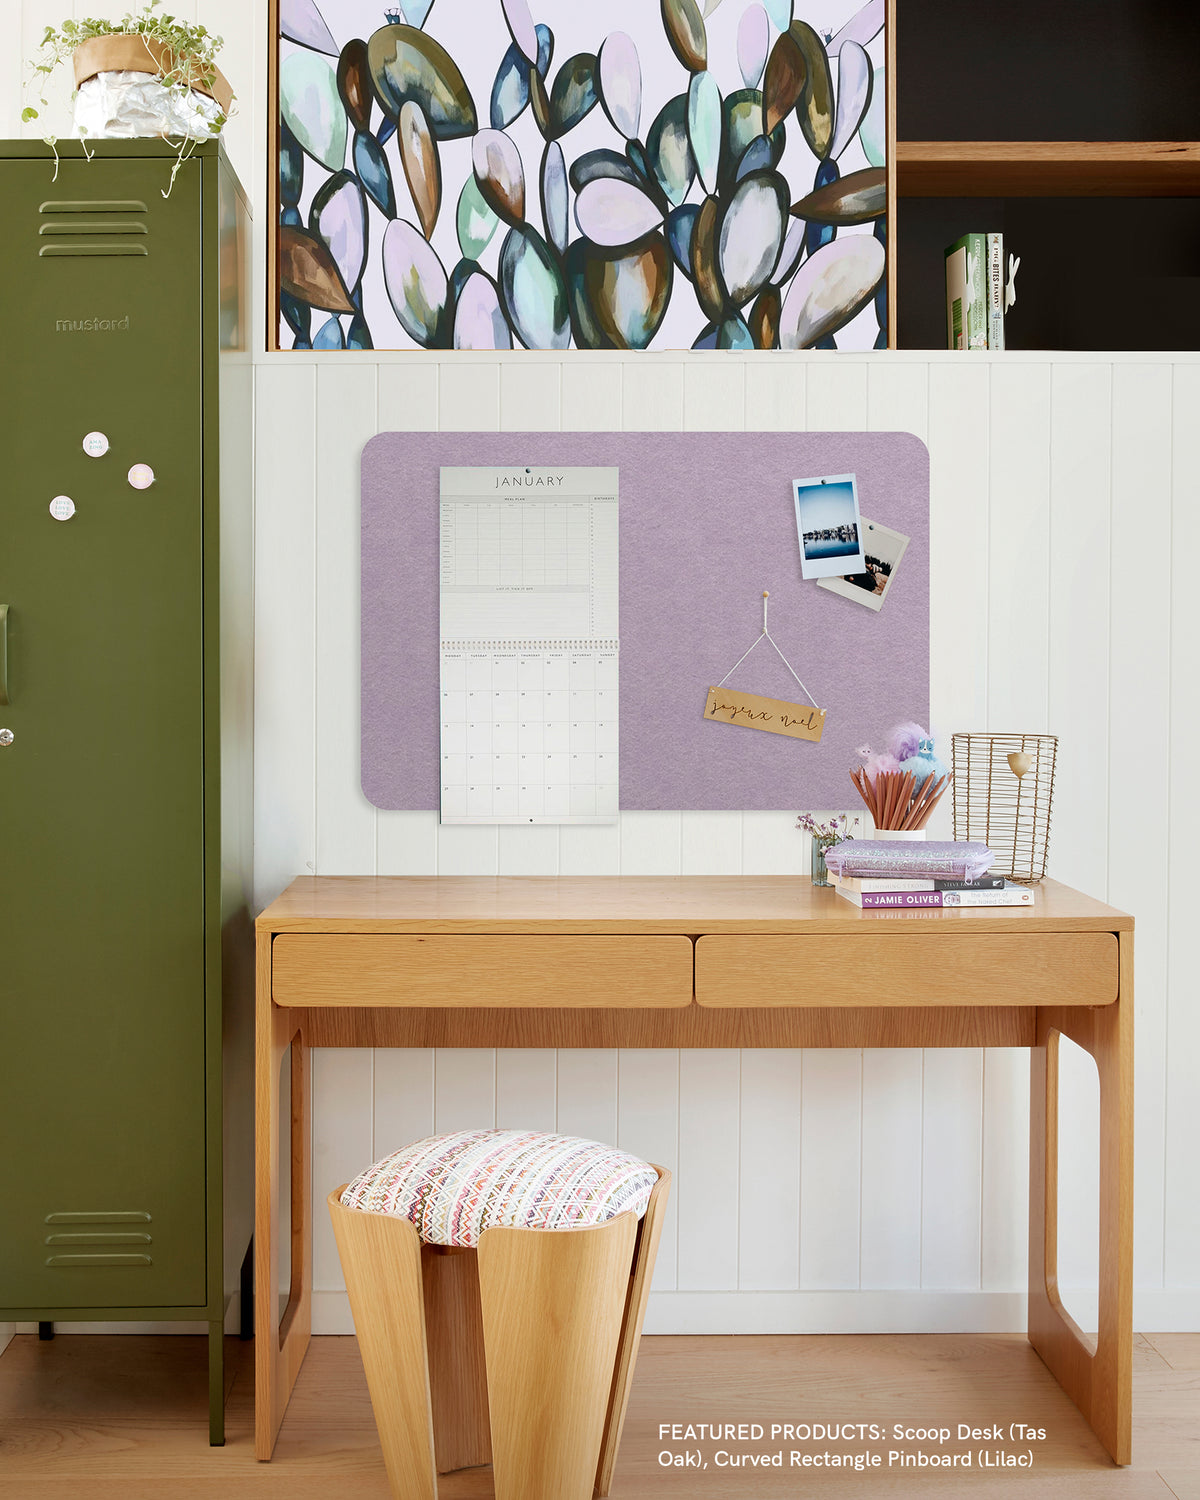 Our Curved Rectangle Pinboards have a beautiful felt-like appearance they are amazing to touch as well as visually appealing in all living spaces. They come with easy peel and stick tabs for your wall, making them ready for pinning straight away. Whether it’s over a desk or simply running down a wall, these pinboards are so versatile for little kids, big kids, and adults alike!